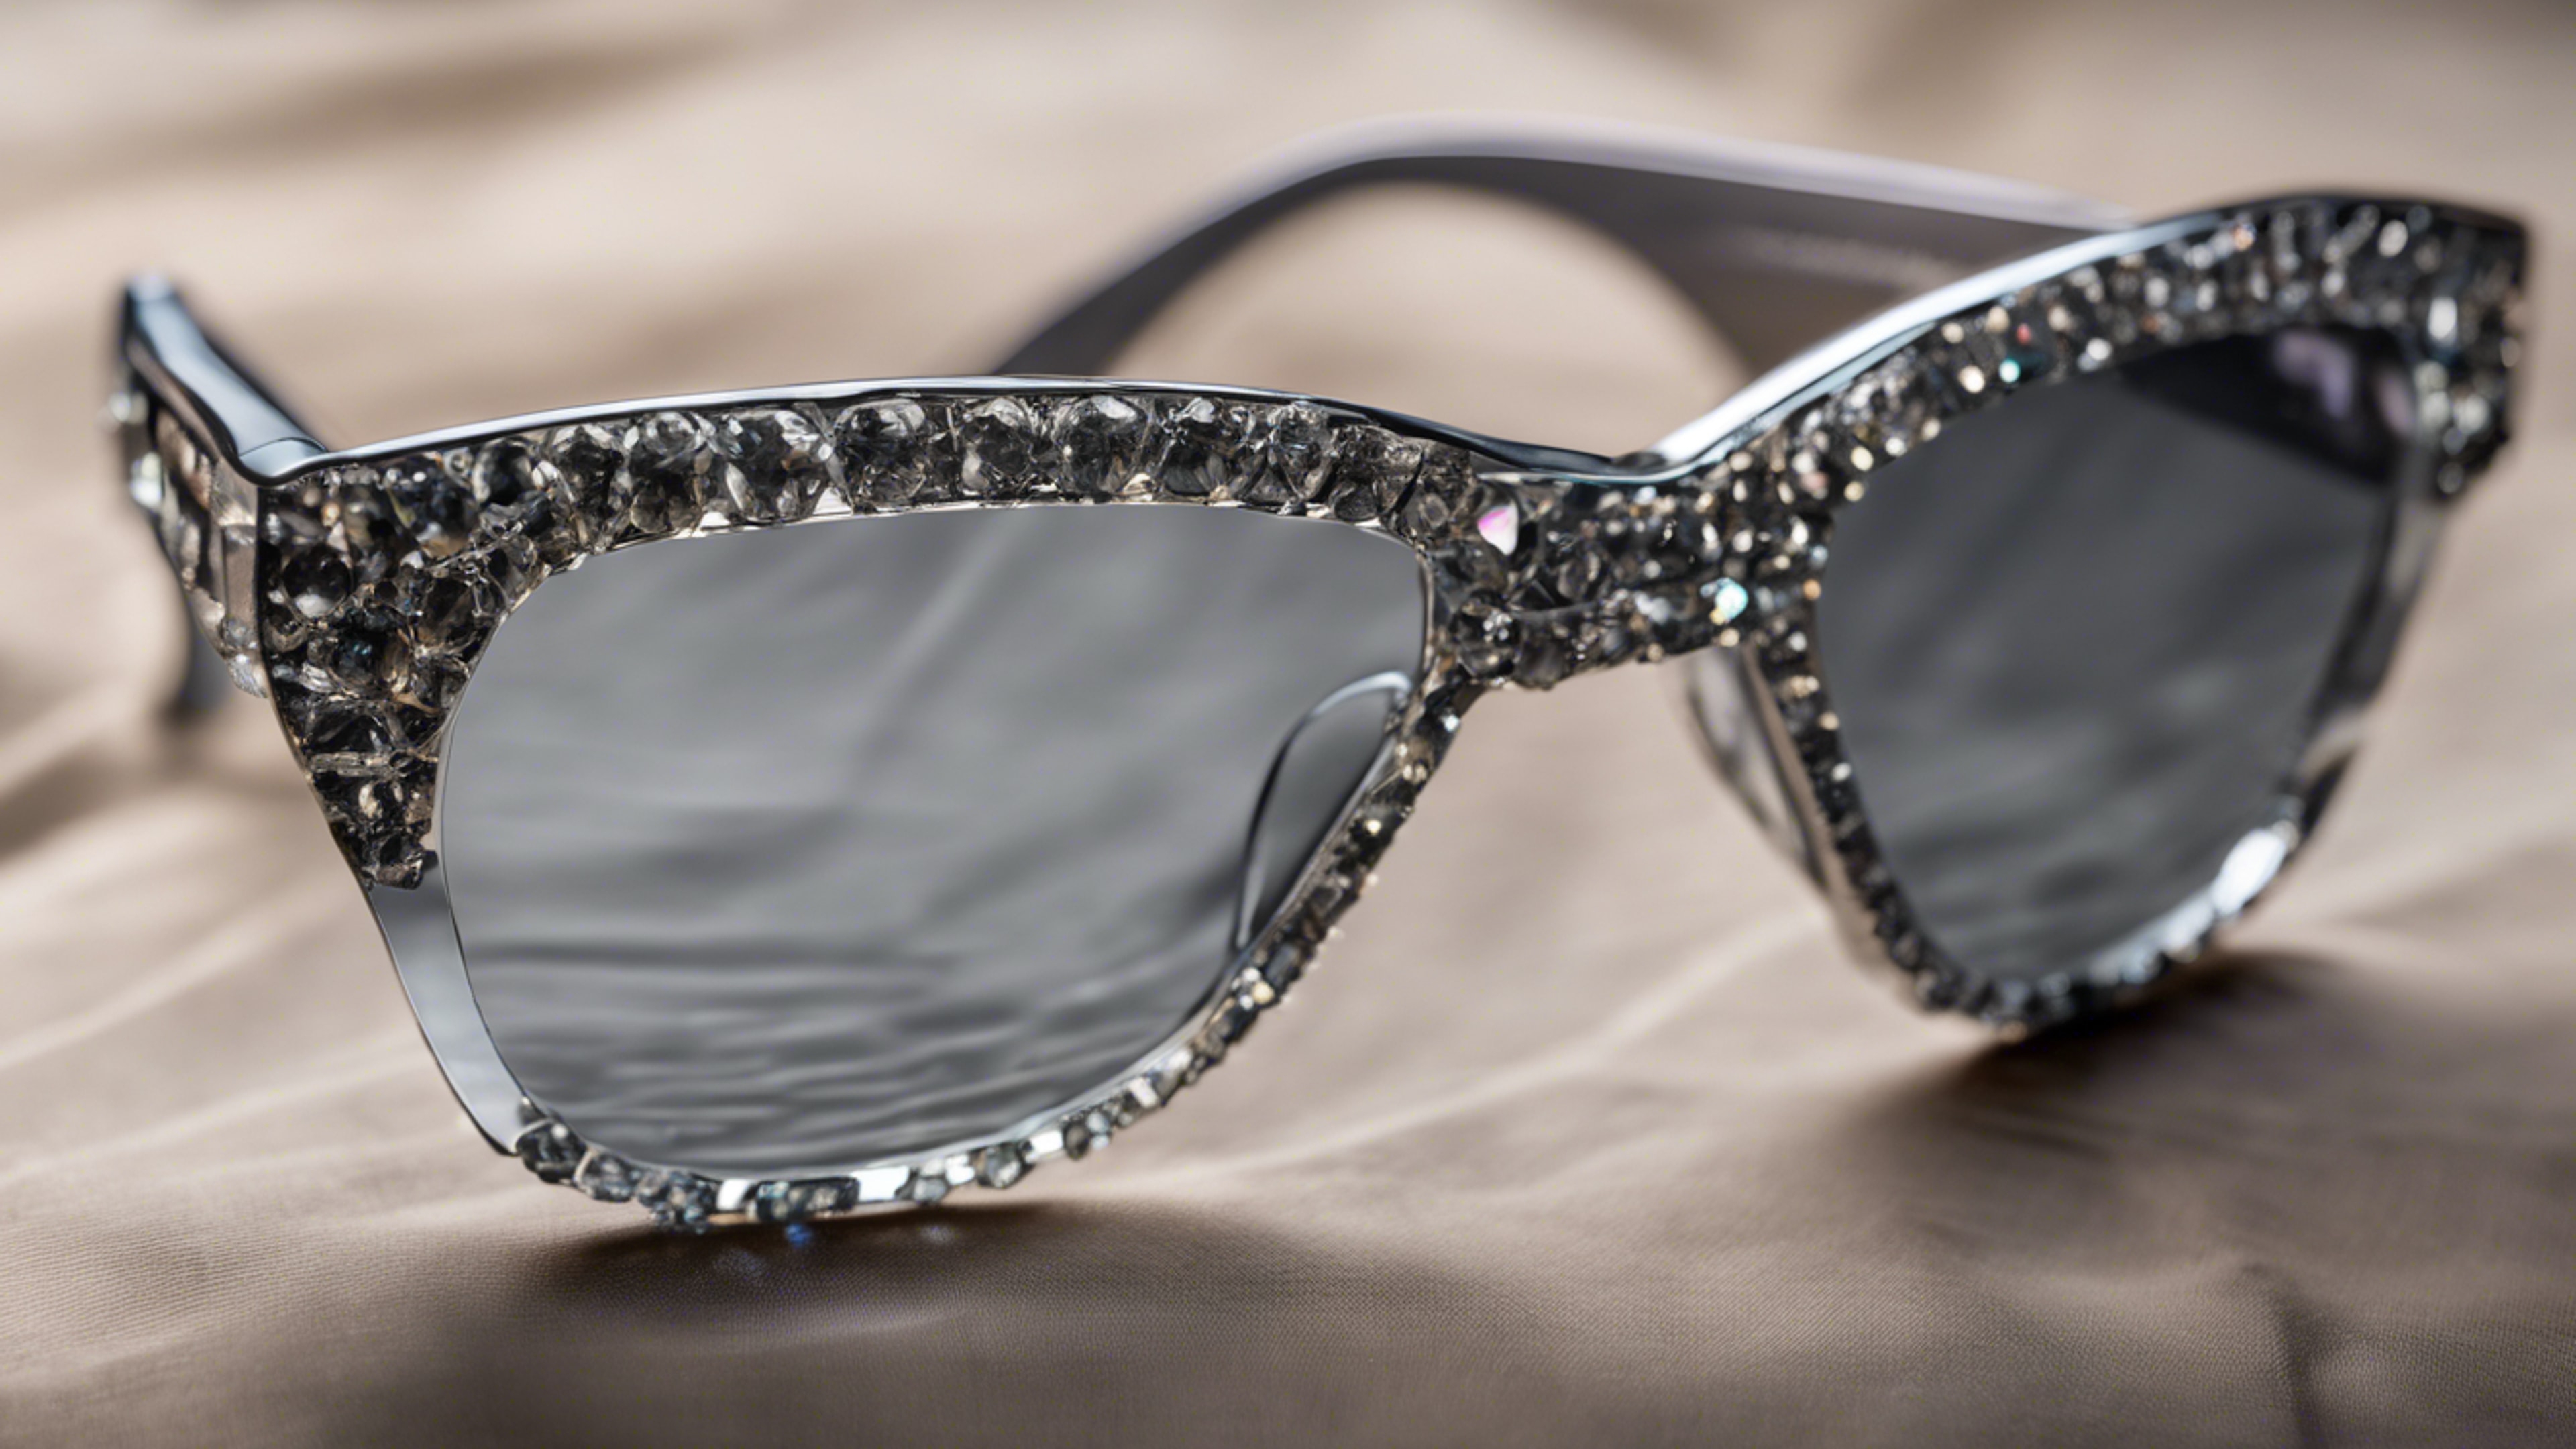 A pair of gray diamond encrusted glasses, epitomizing luxury and status. Tapet[6d0b74d92658455f9dbd]